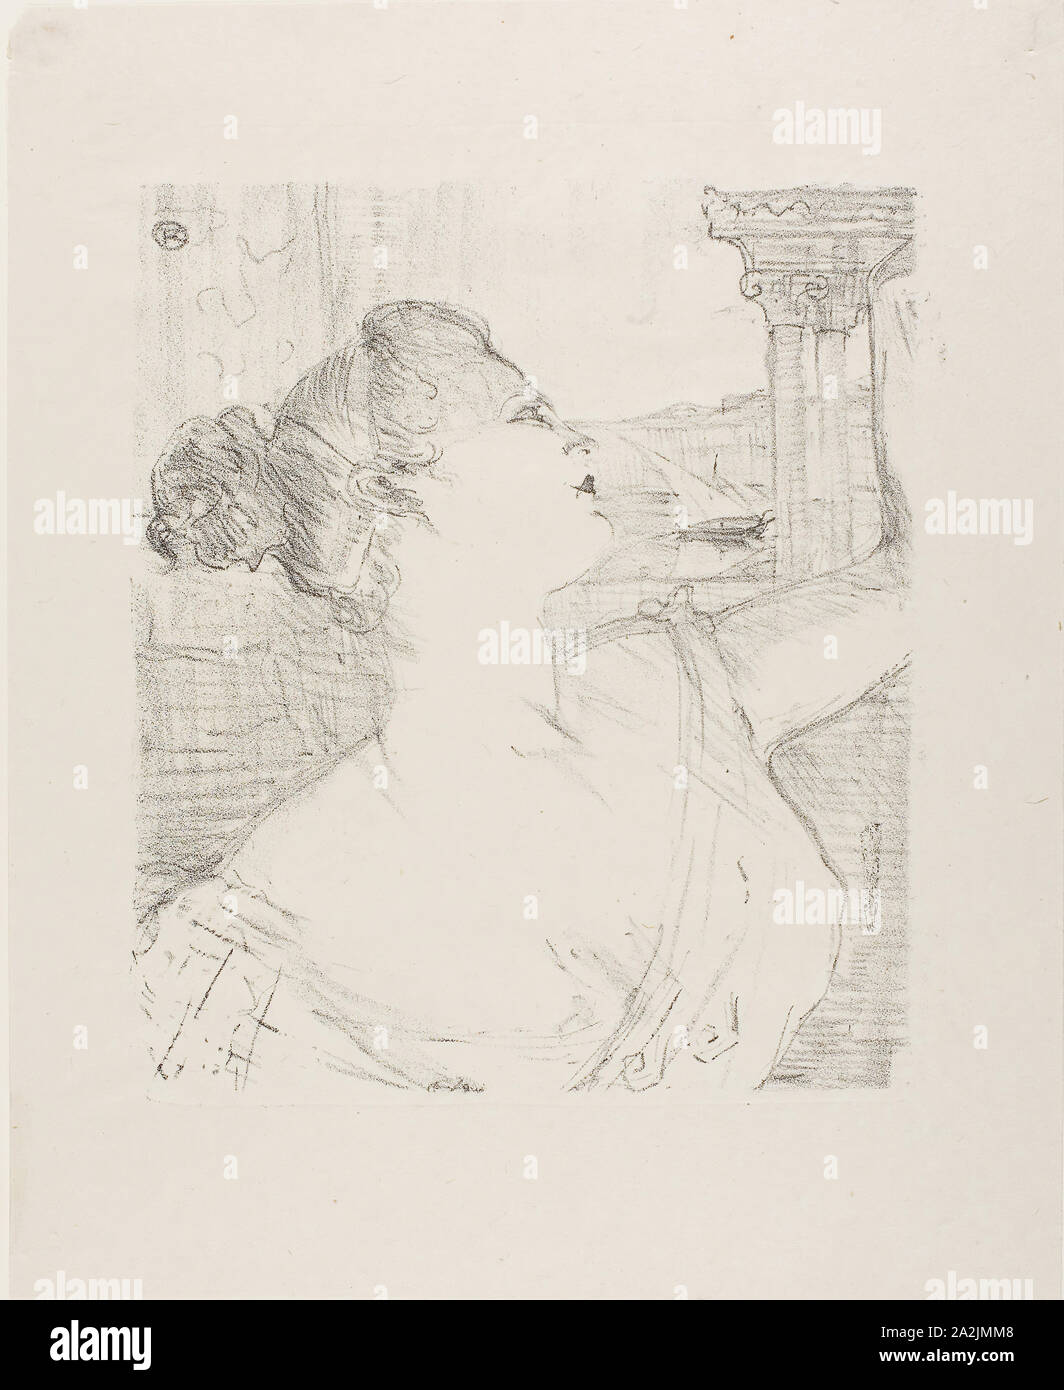 Sybil Sanderson, from Treize Lithographies, 1898, published before 1906, Henri de Toulouse-Lautrec, French, 1864-1901, France, Lithograph on ivory laid paper, 274 × 244 mm (image), 391 × 317 mm (sheet Stock Photo